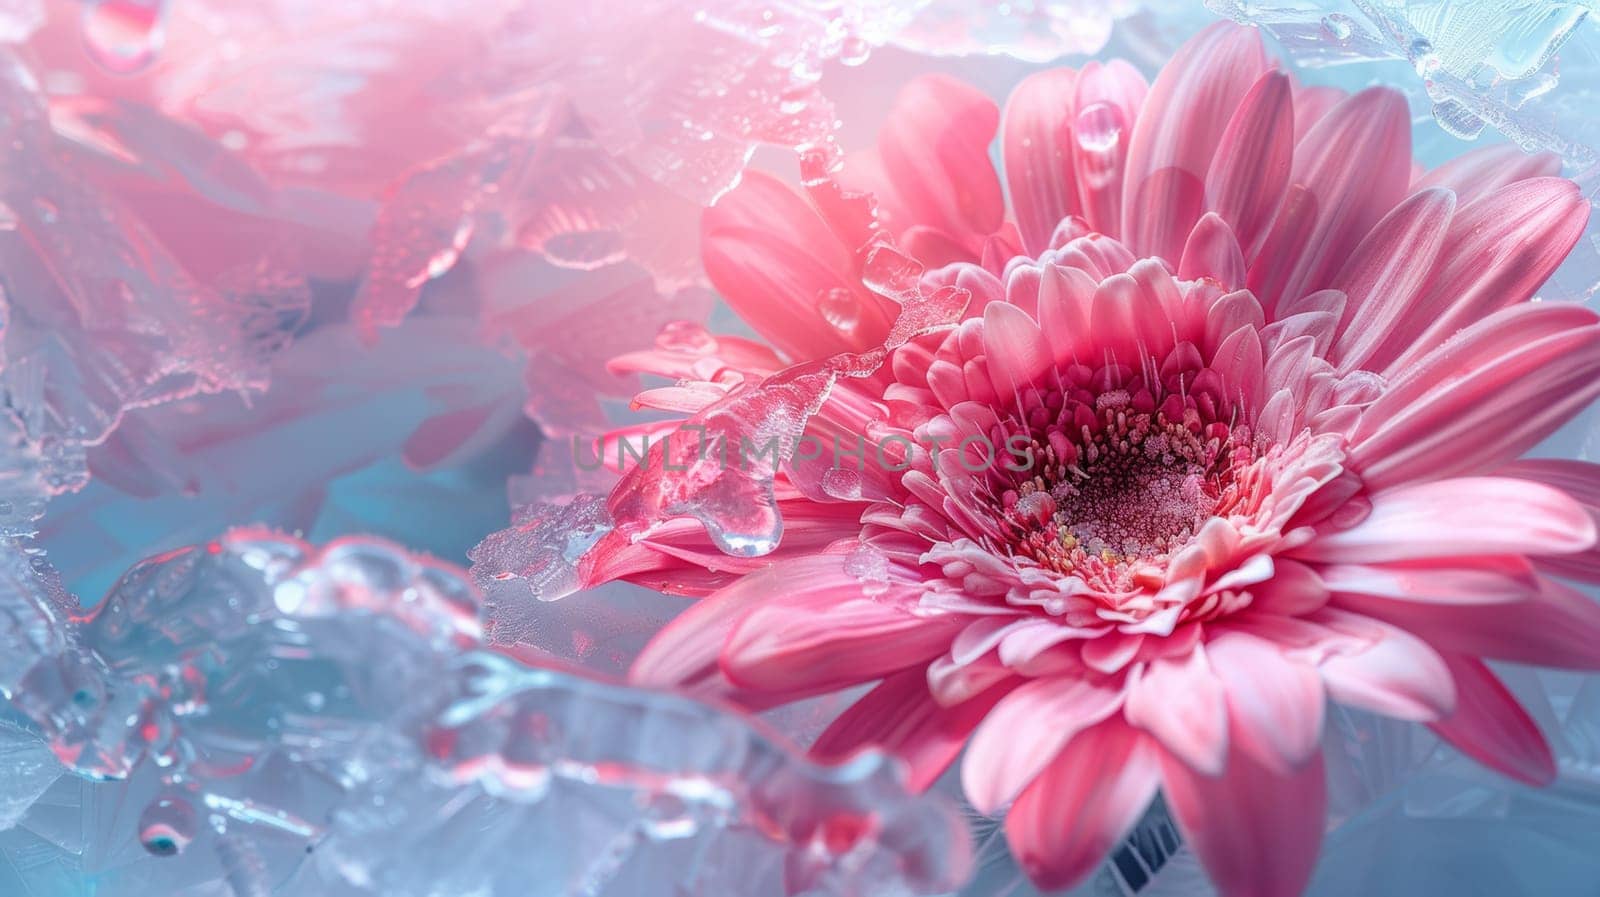 Pink gerbera flower with water droplets and ice crystals.